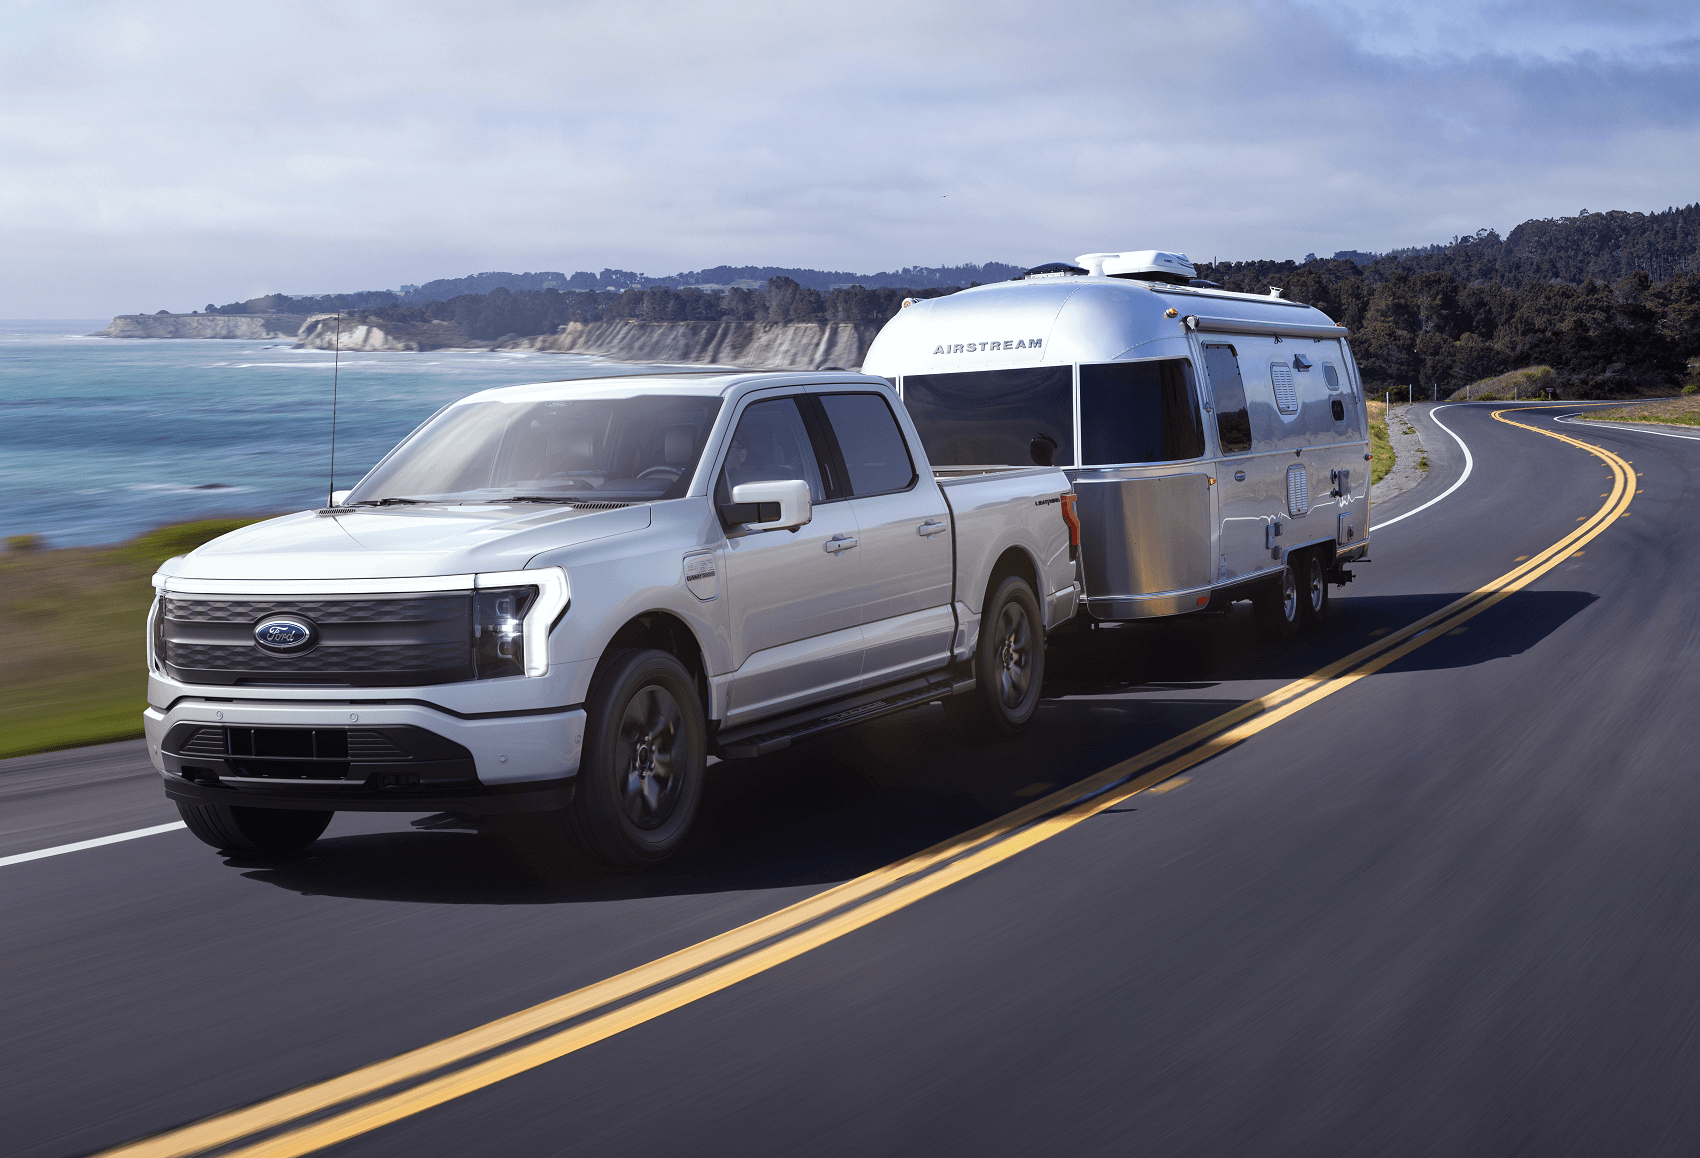 Ford F-150 Lightning towing an airstream